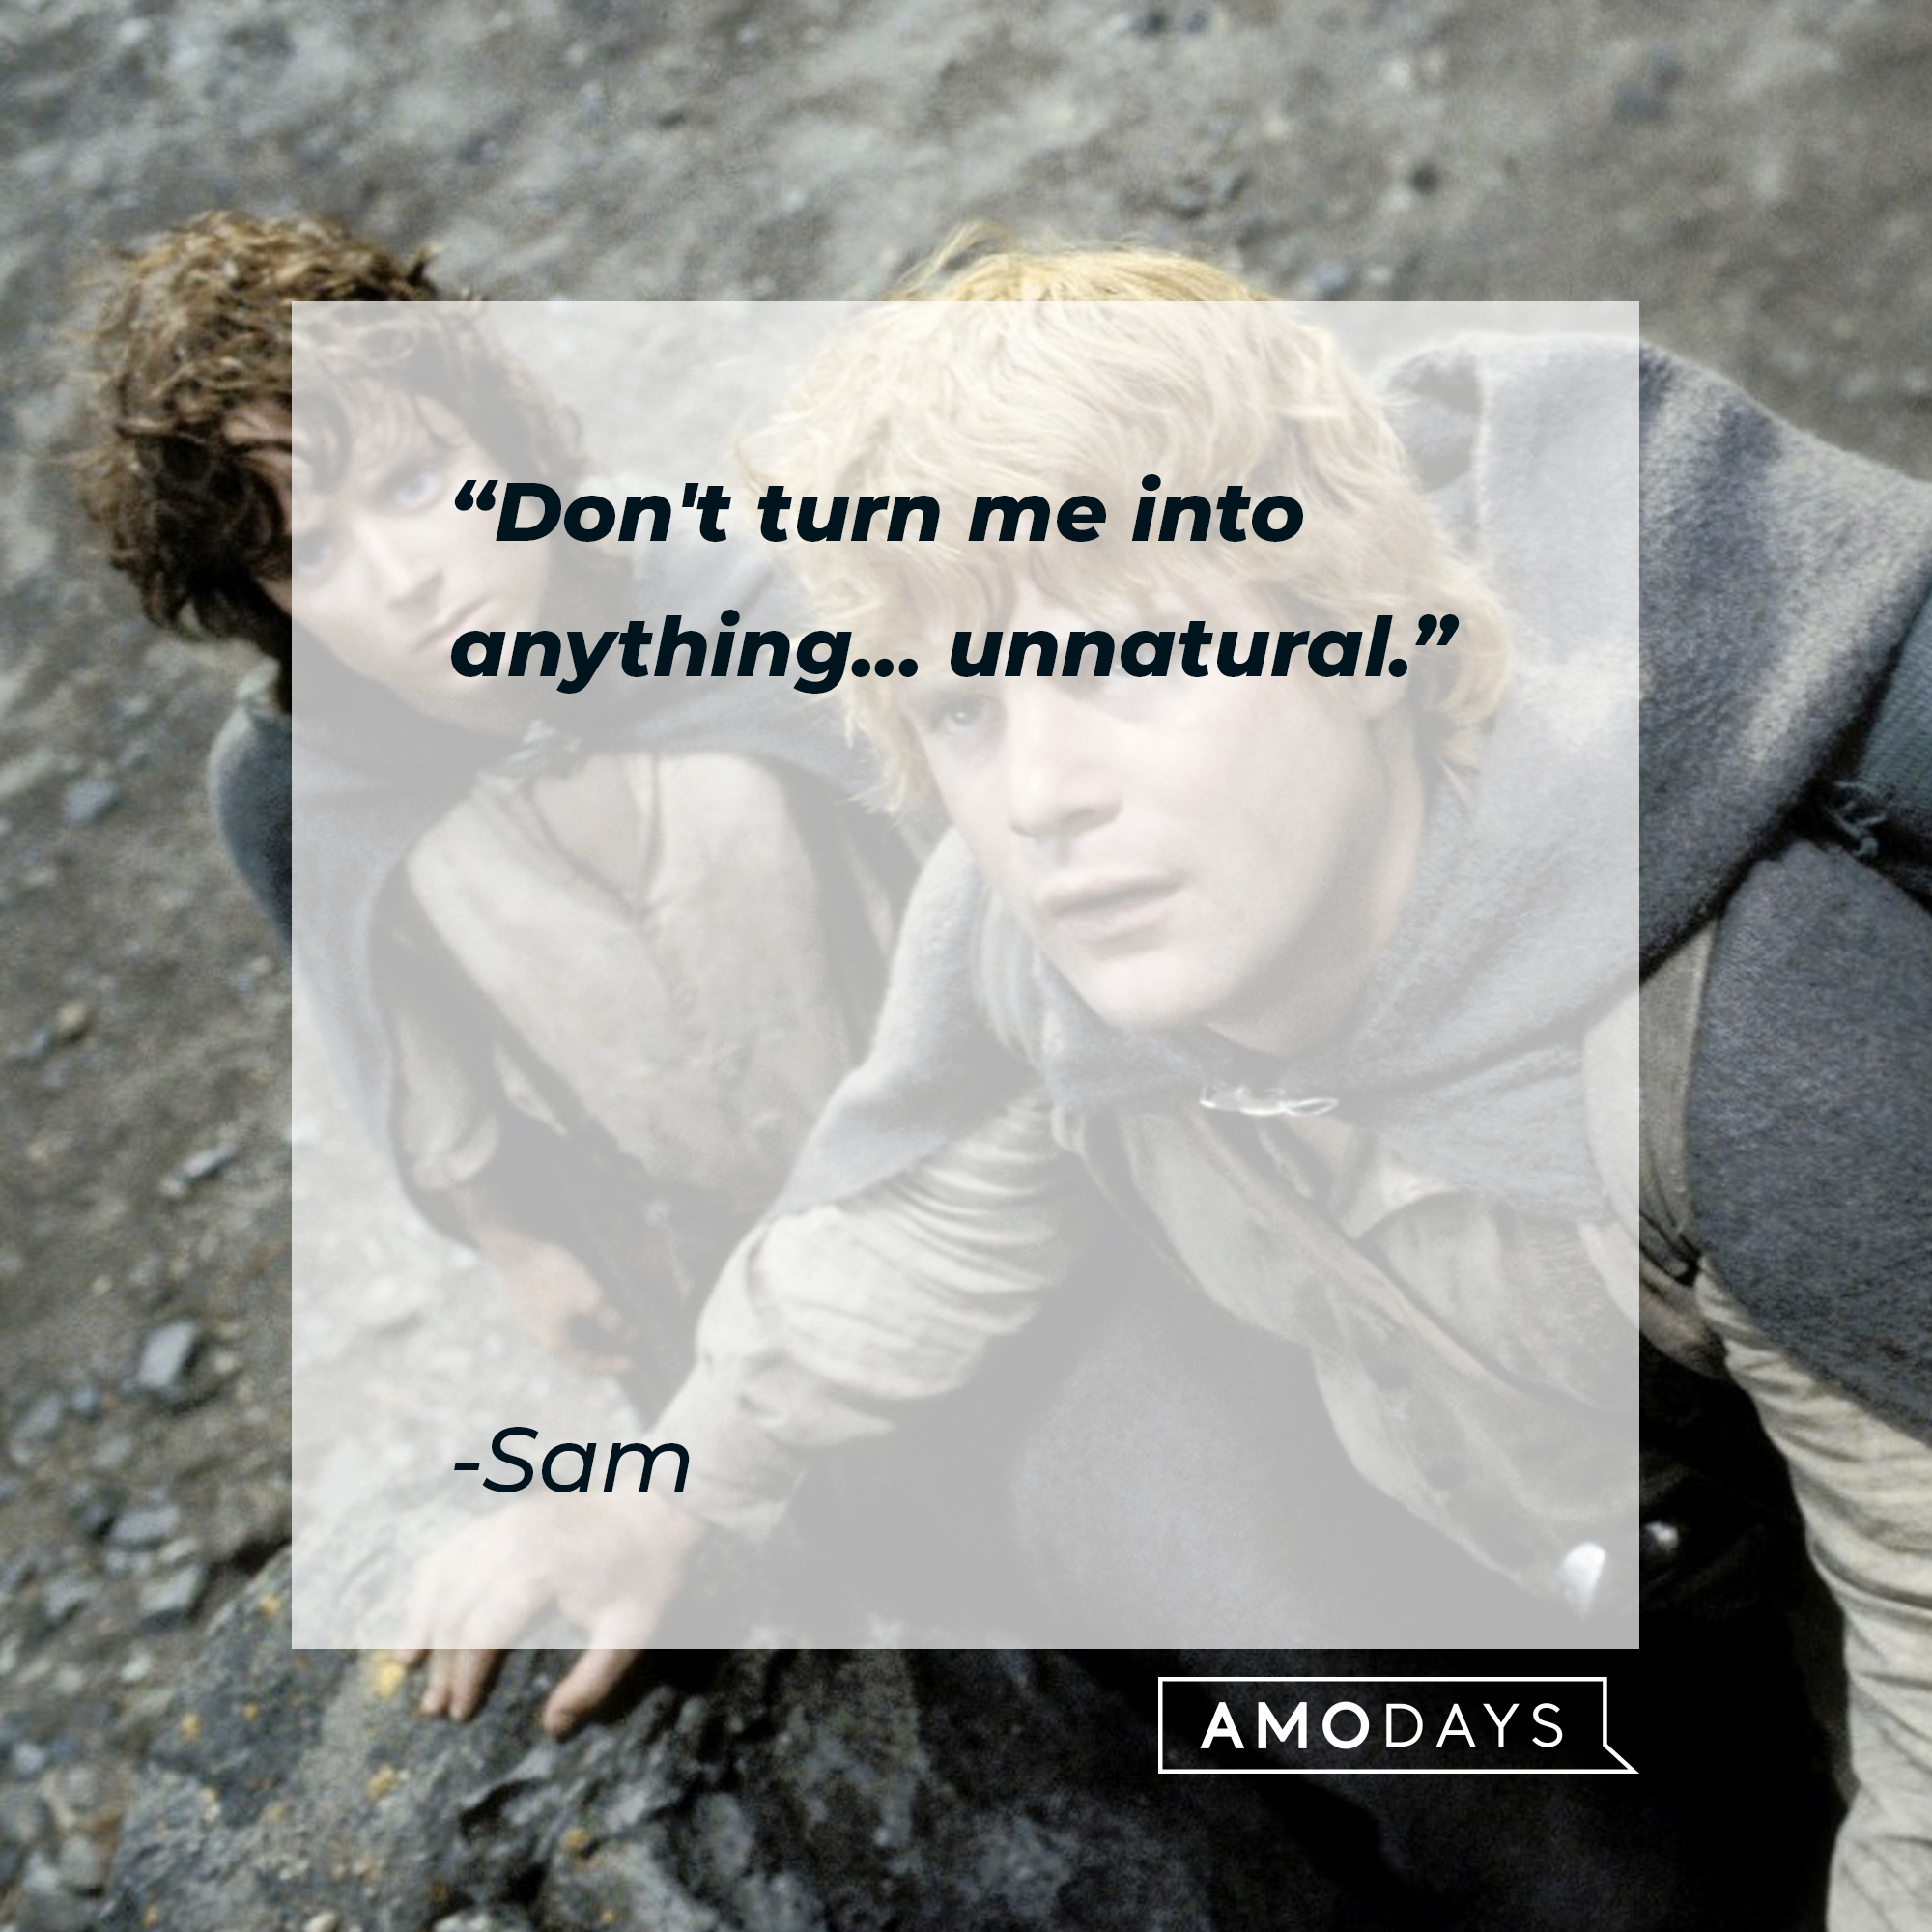 Sam's quote: "Don't turn me into anything... unnatural." | Source: facebook.com/lordoftheringstrilogy